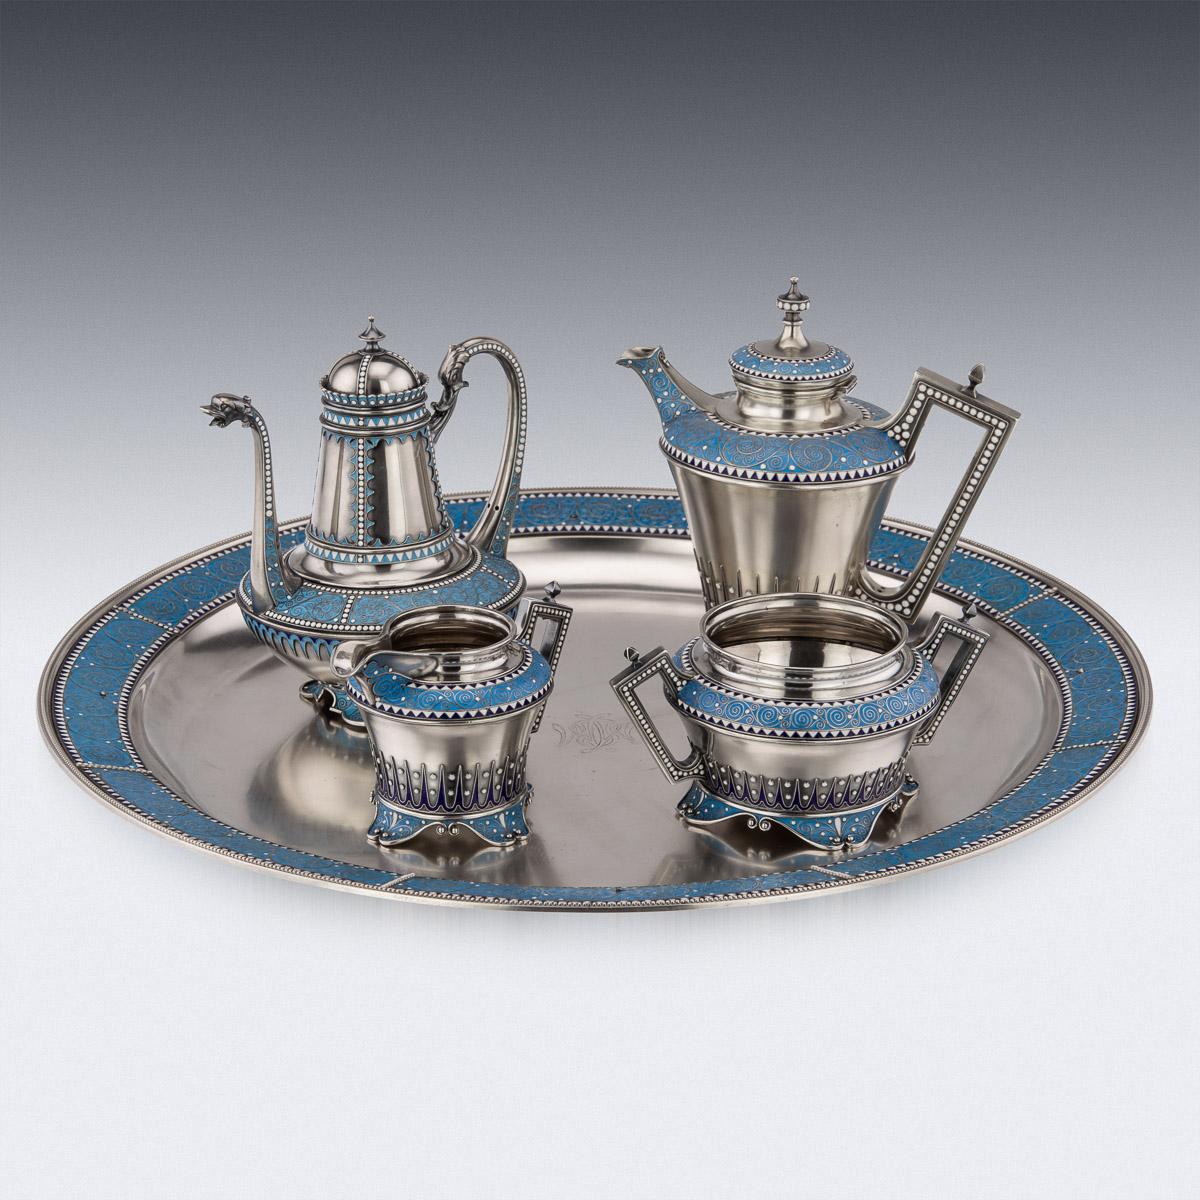 19th century Norwegian solid silver & cloisonneé-enamel tea service on tray, comprised of a coffee pot, teapot, sugar bowl, cream jug and six cups with saucers on a large serving tray, decorated with blue turquoise enamel on wirework floral scrolls,